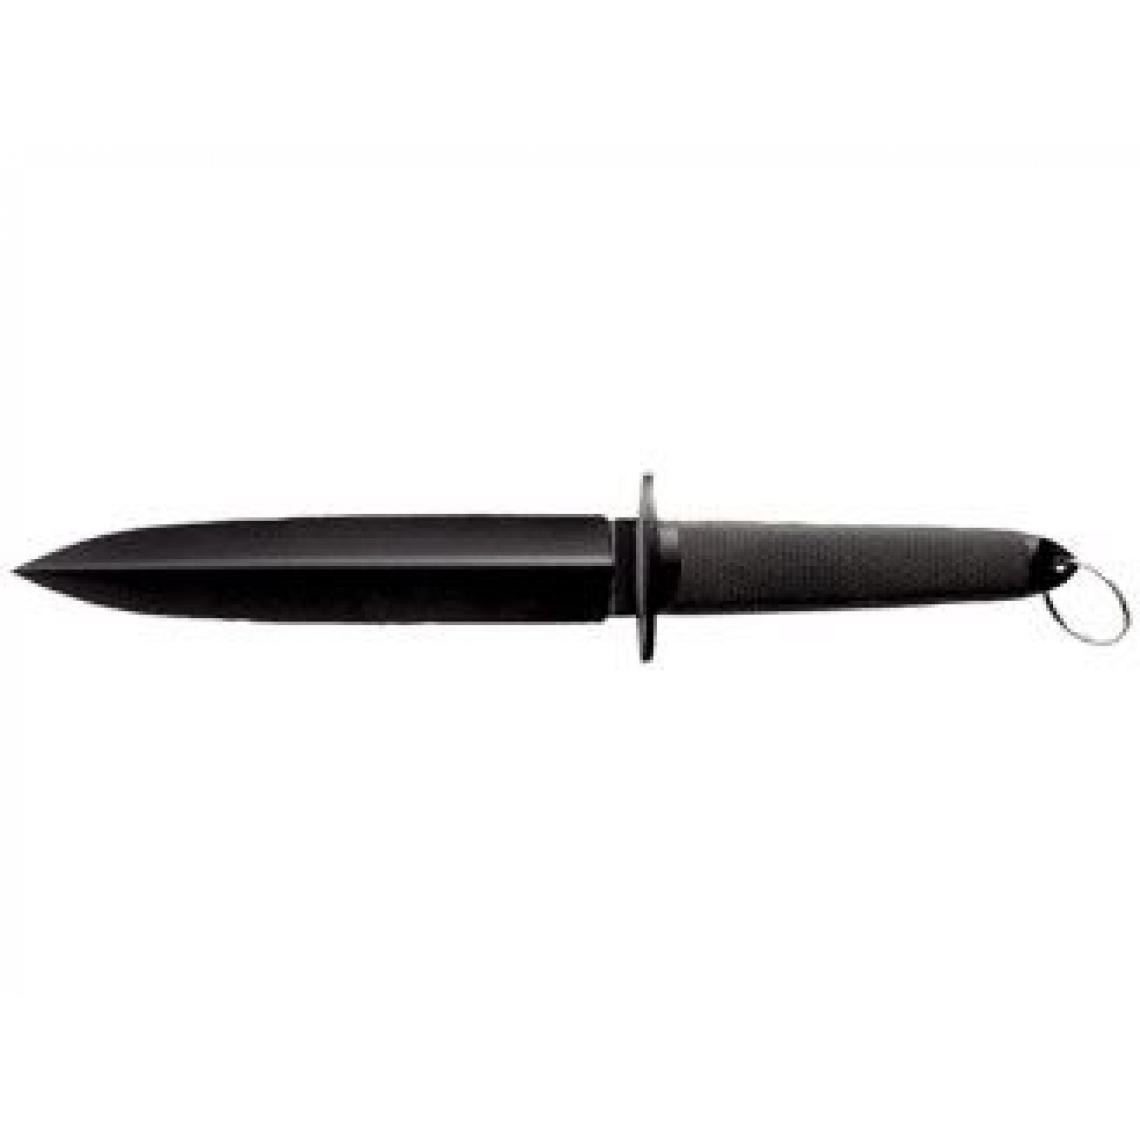 Divers Marques - Cold Steel FGX TAI PAN 92FTP - Outils de coupe